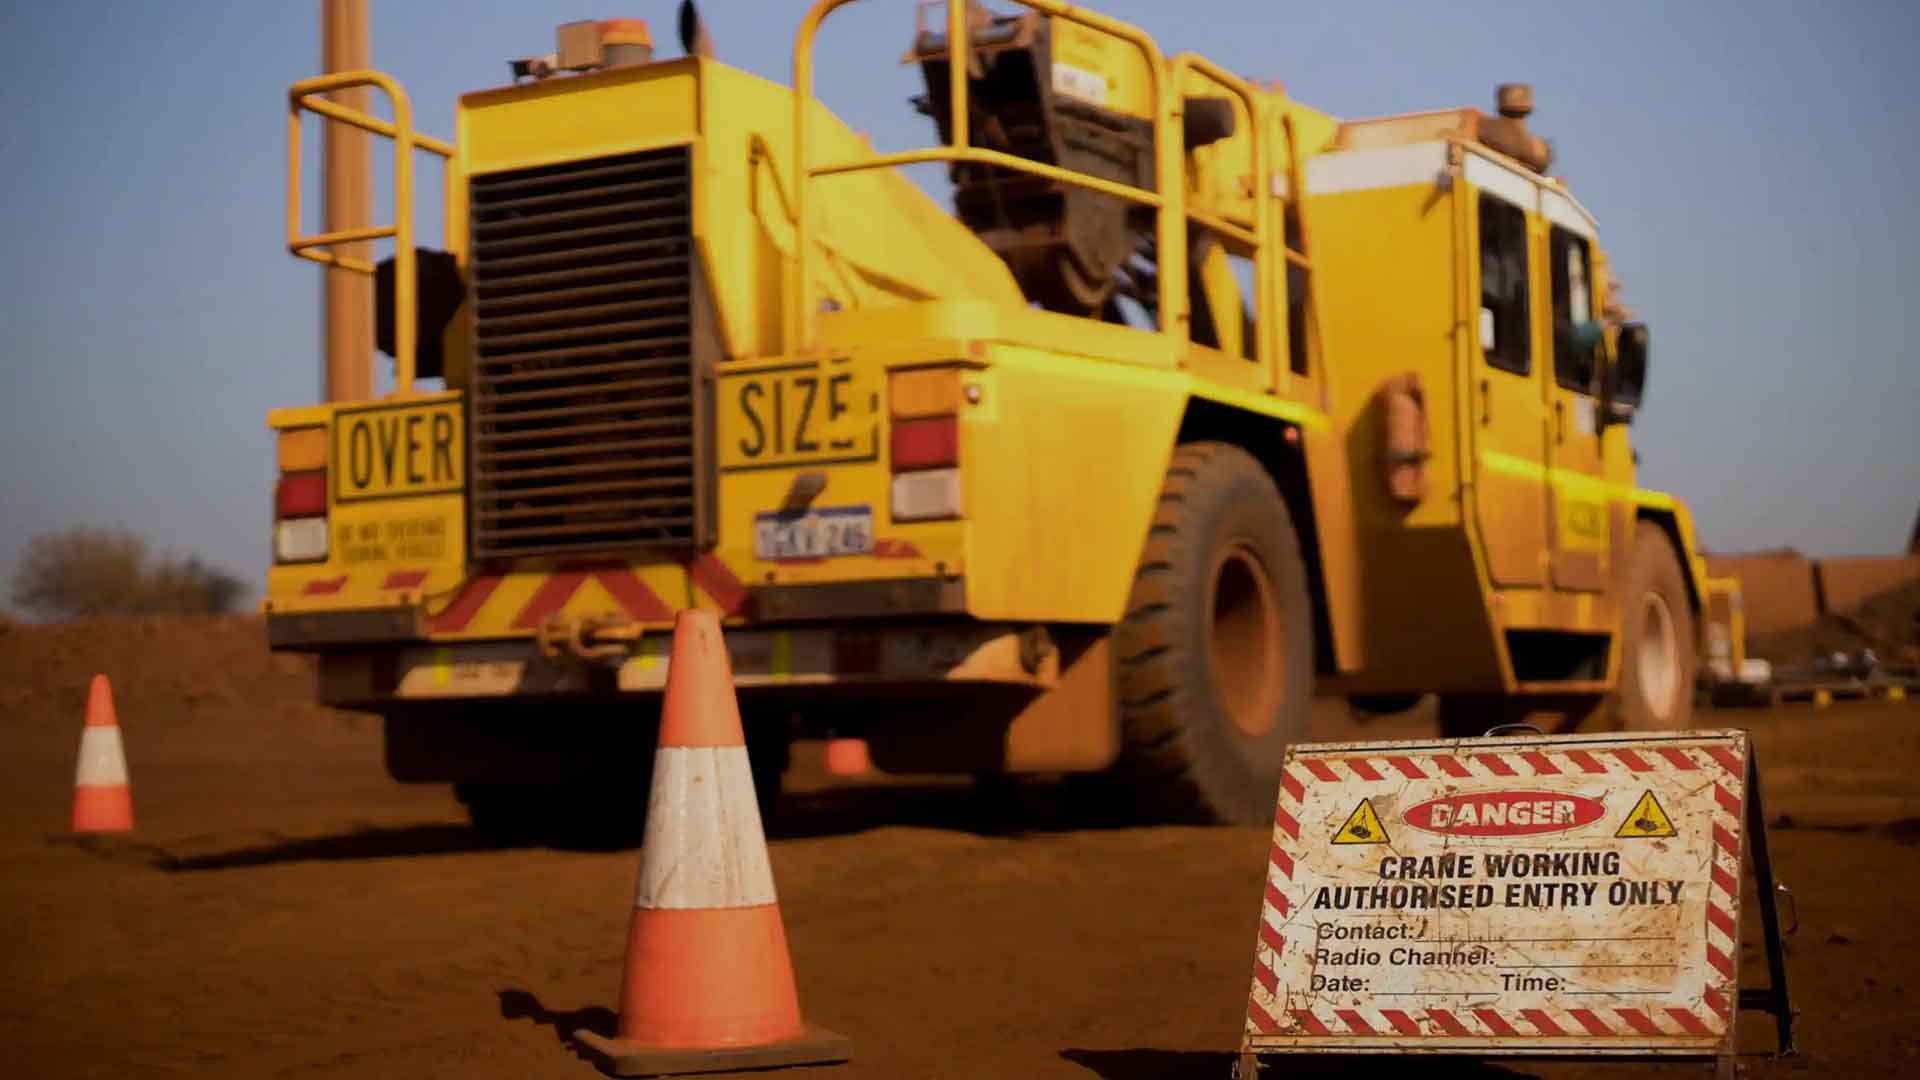 heavy yellow machinery with danger sign in the foreground